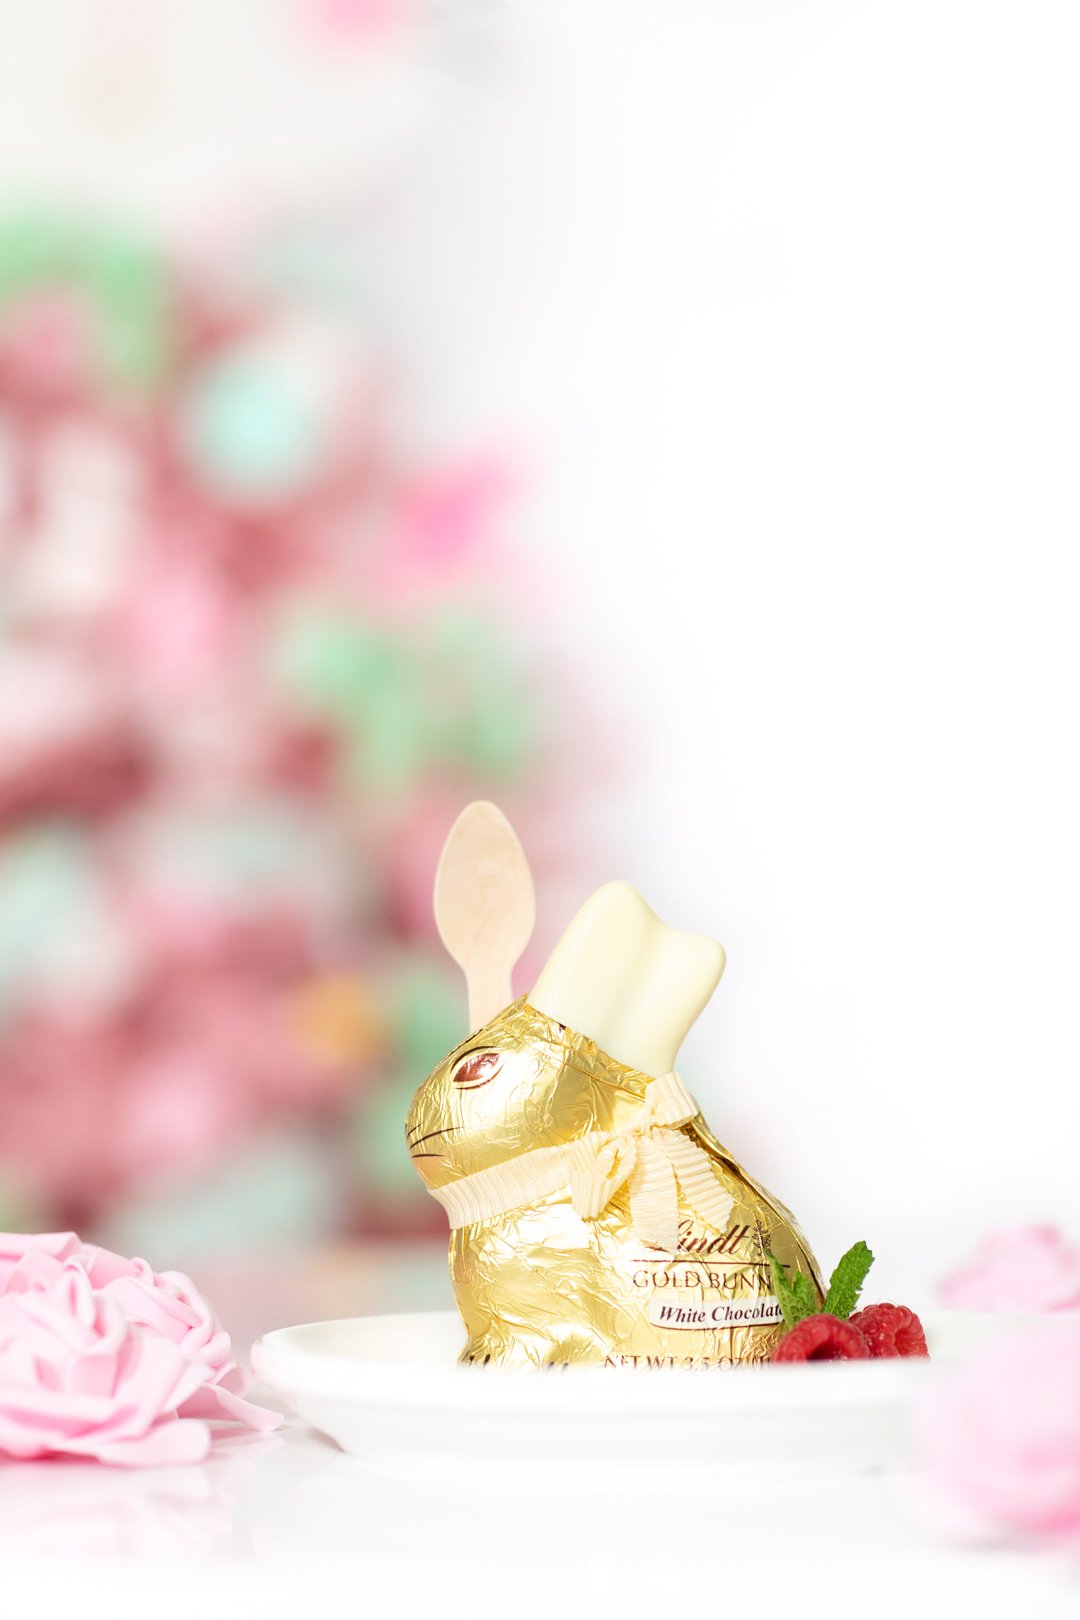 adorable easter bunny dessert. Lindt bunny stuffed with trifle dessert